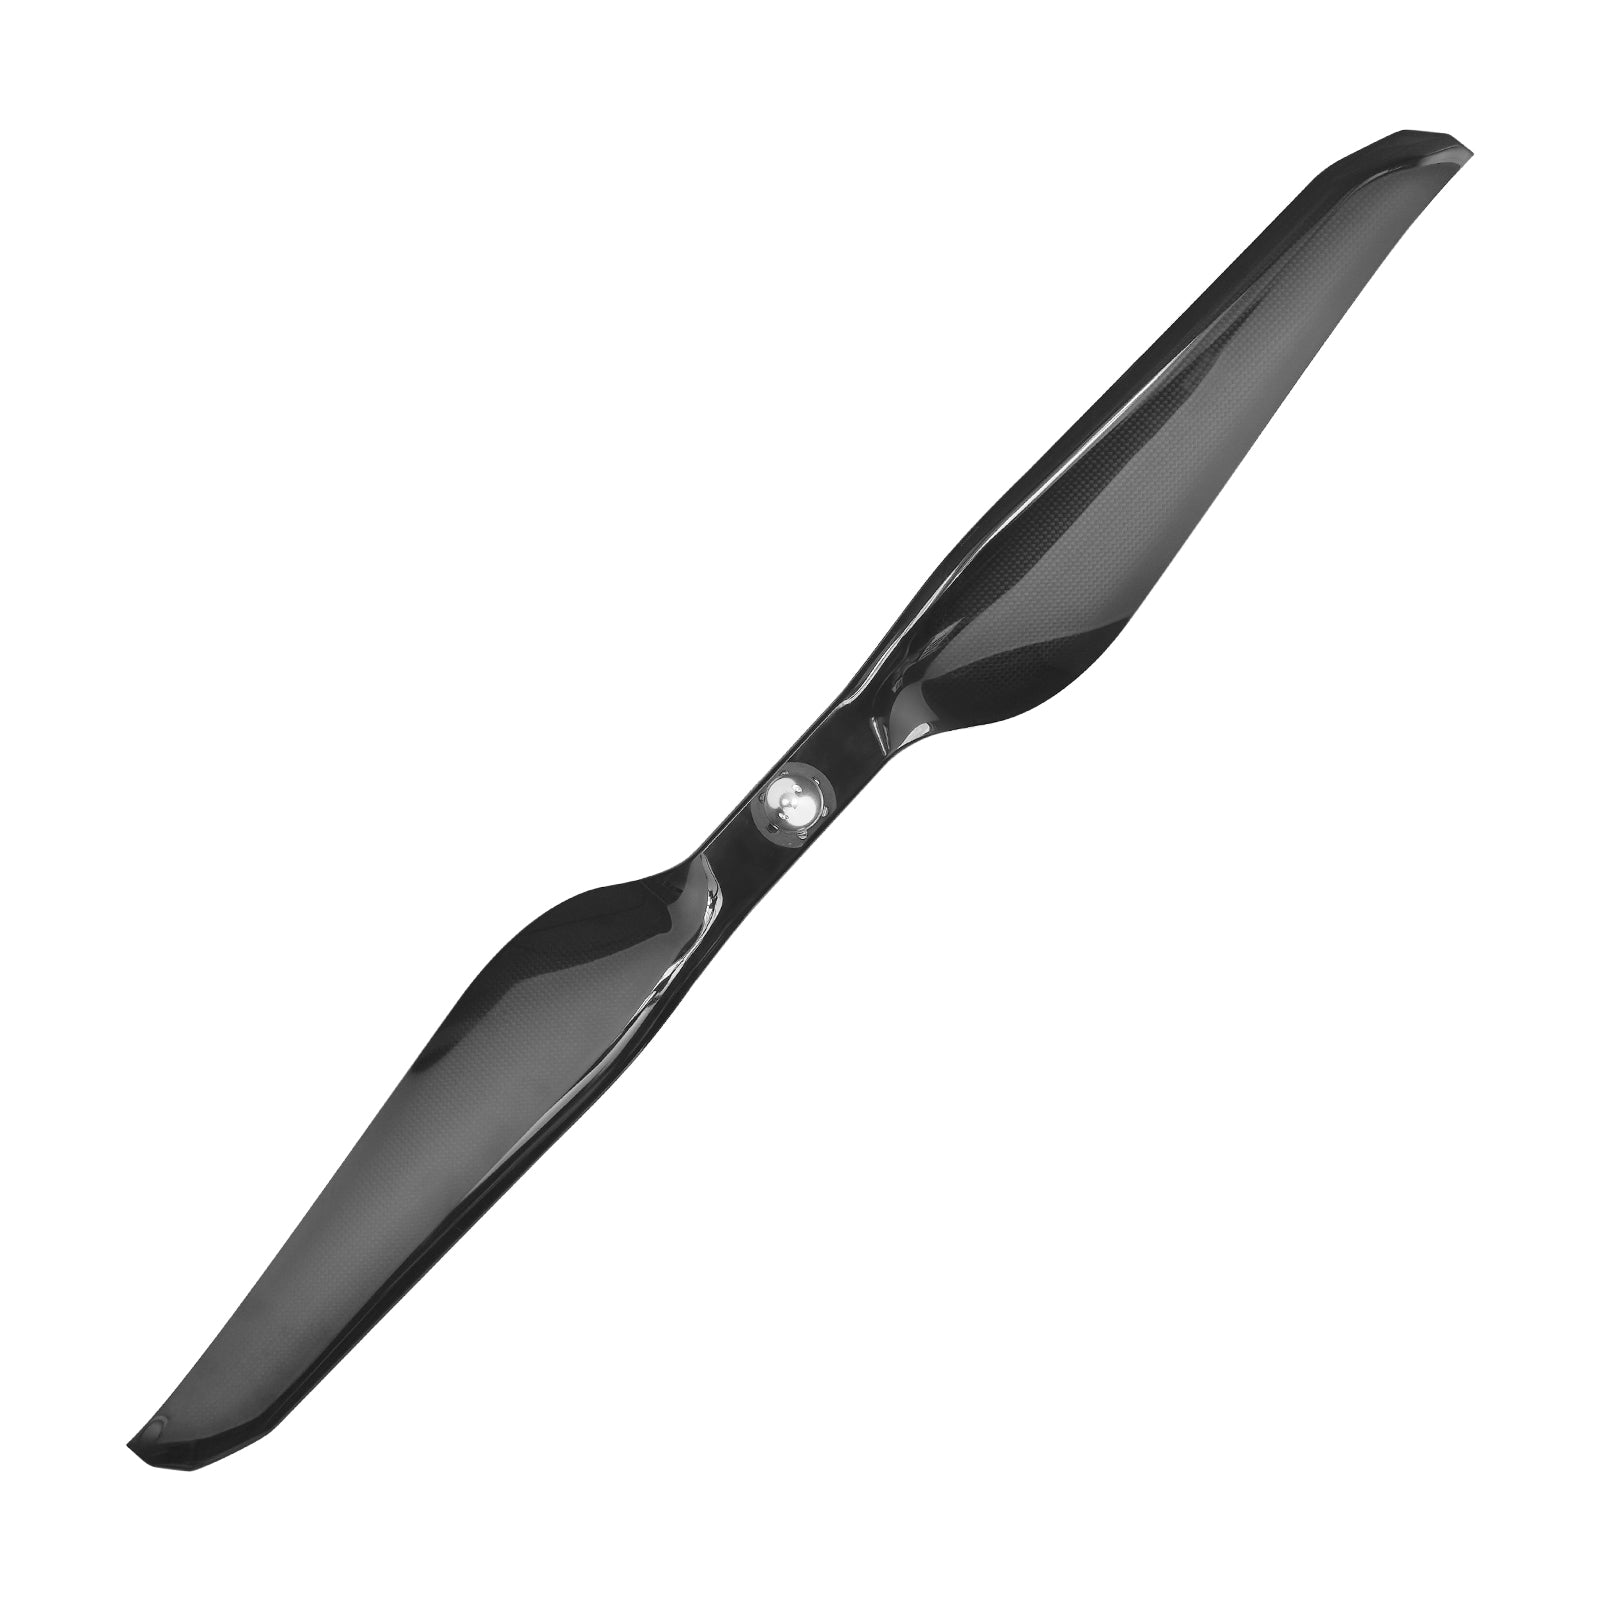 36 Inch CW CCW Carbon Fiber Propeller for BLDC Motor Heavy Lift Drone